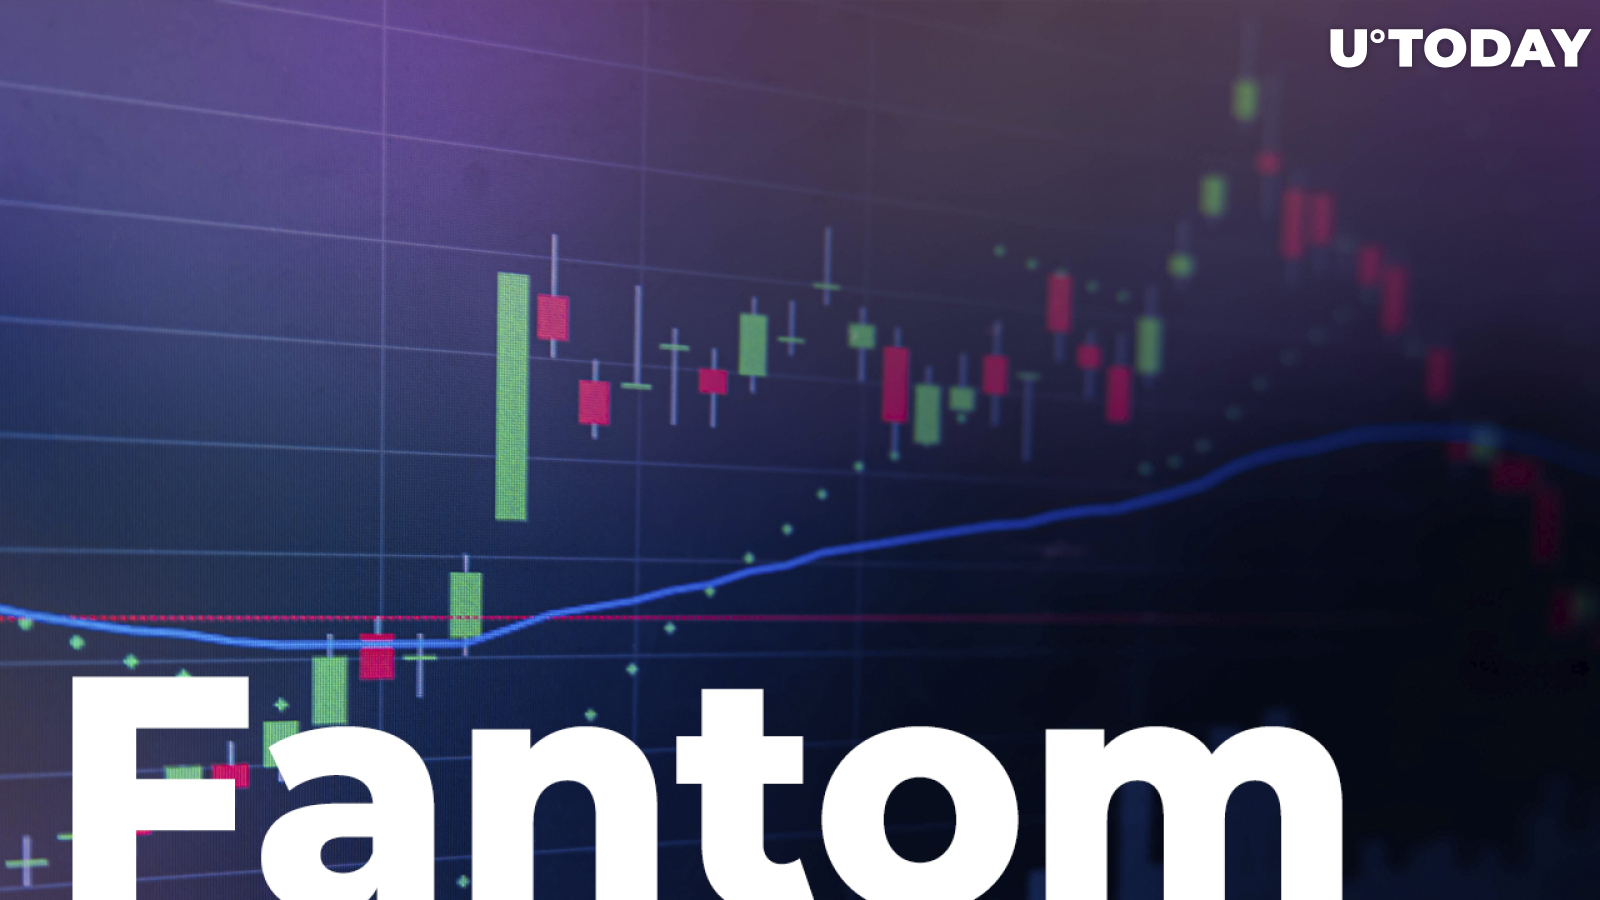 Fantom Price Spikes on Speculation of Andre Cronje's Return, But TVL Drops